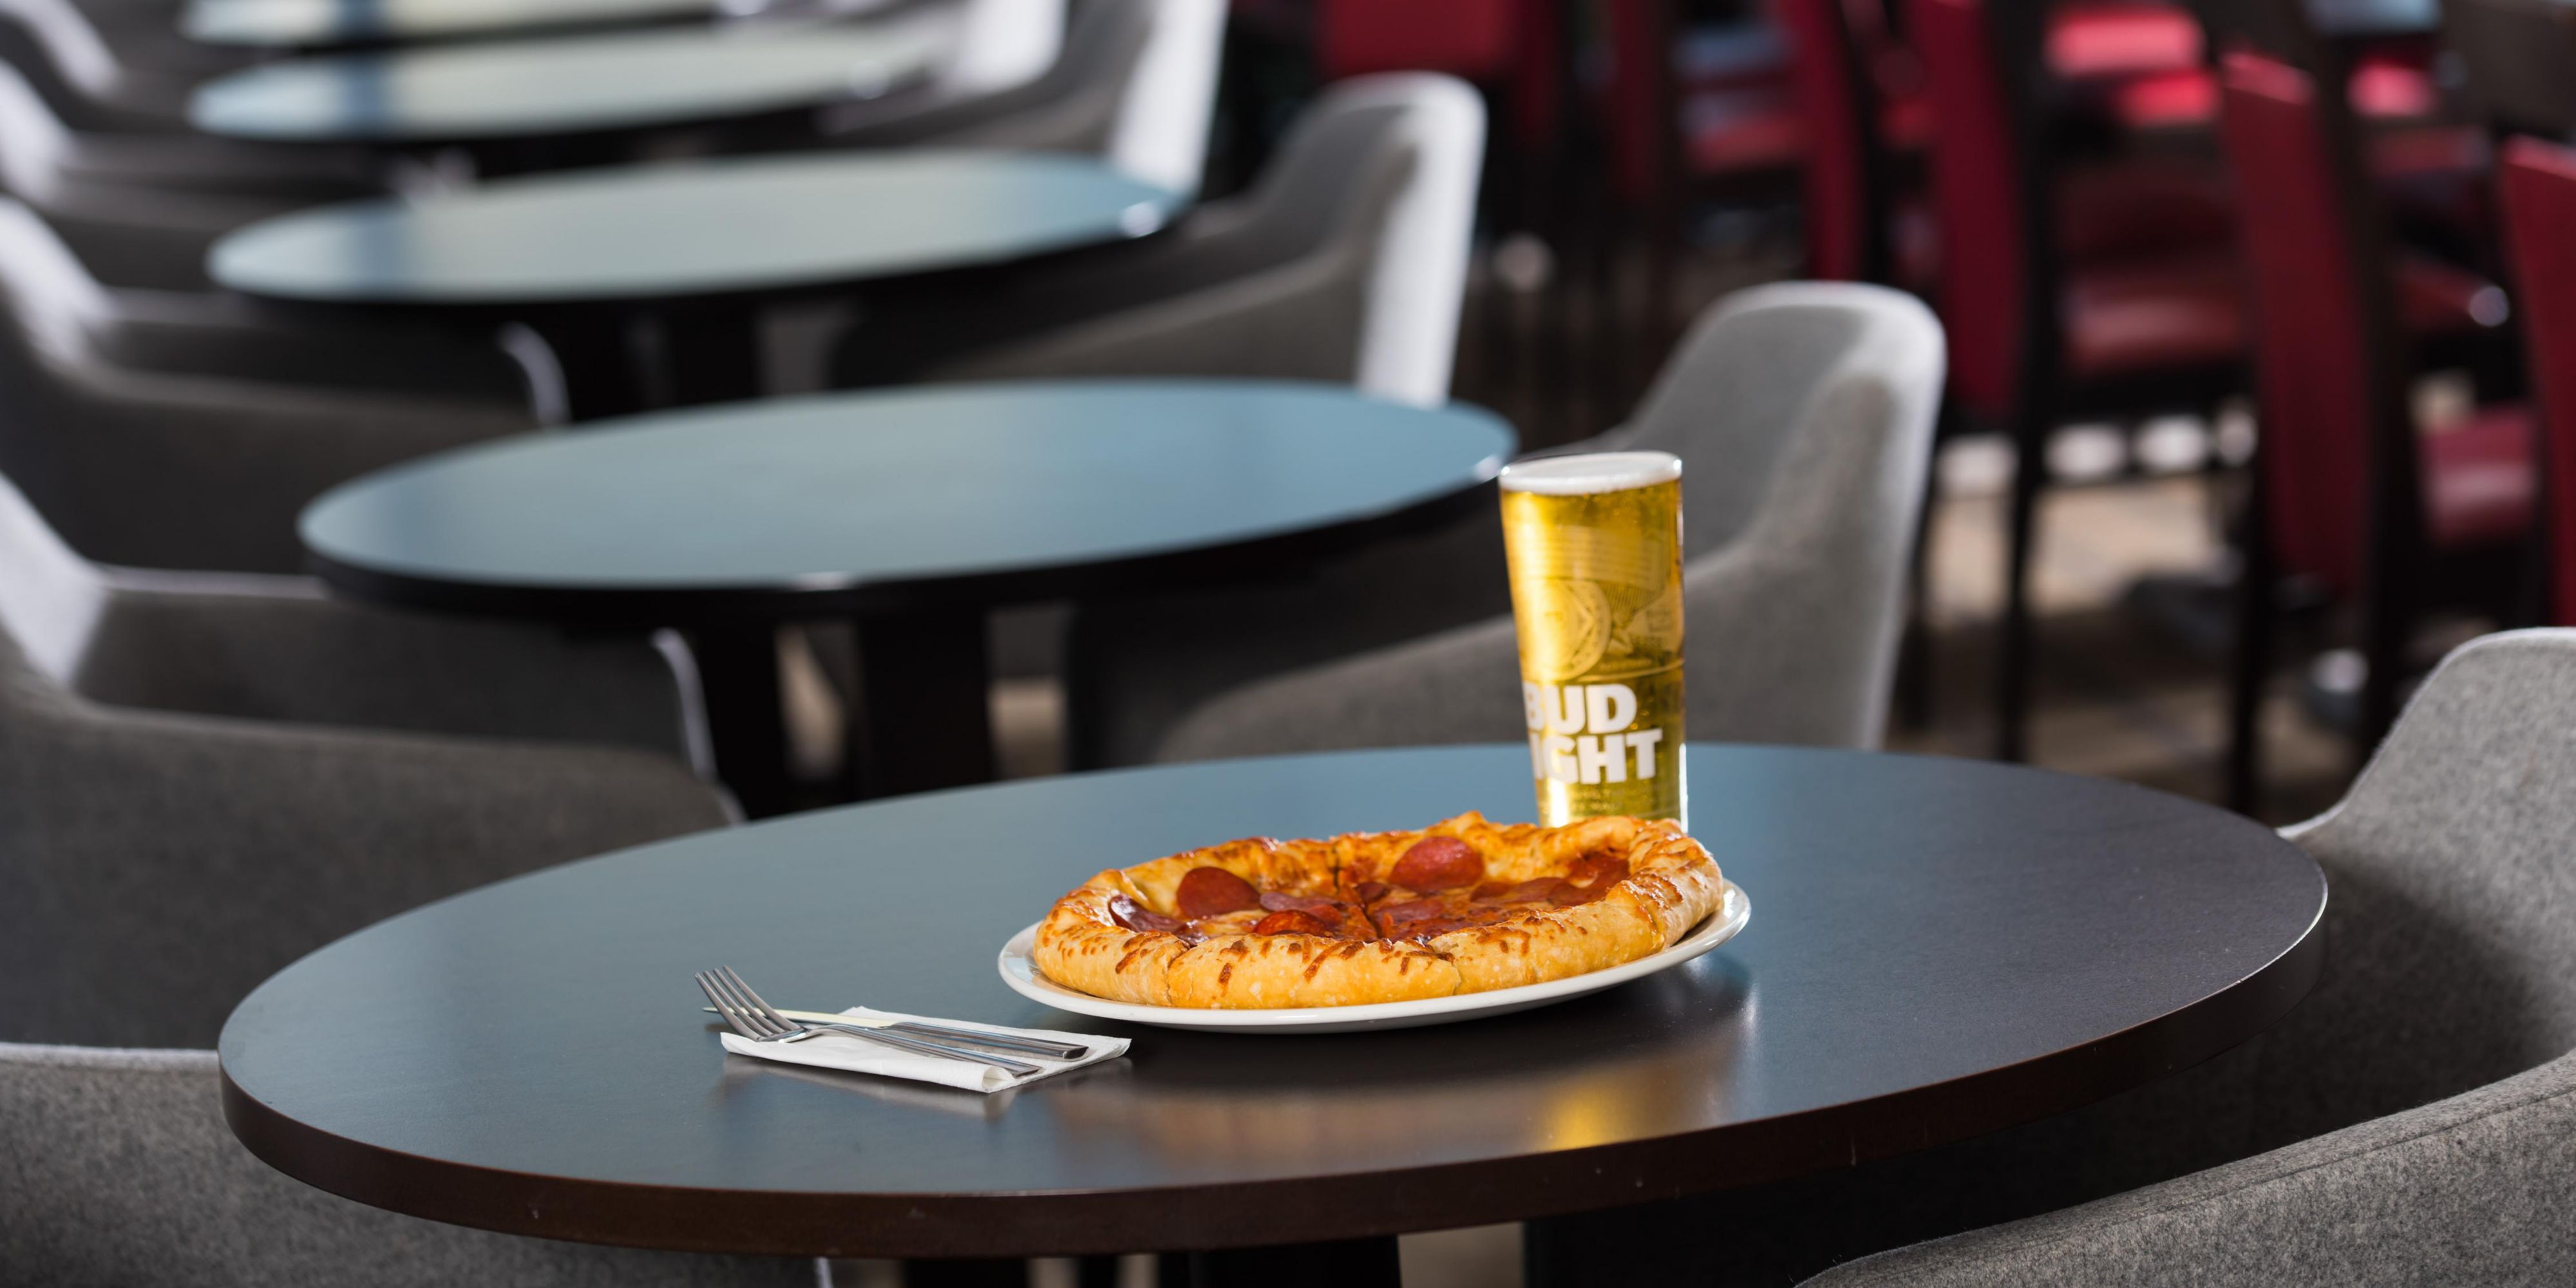 Peckish after a day's exploring? Order light bites like nachos and pizzas from the bar to satisfy hunger cravings. 